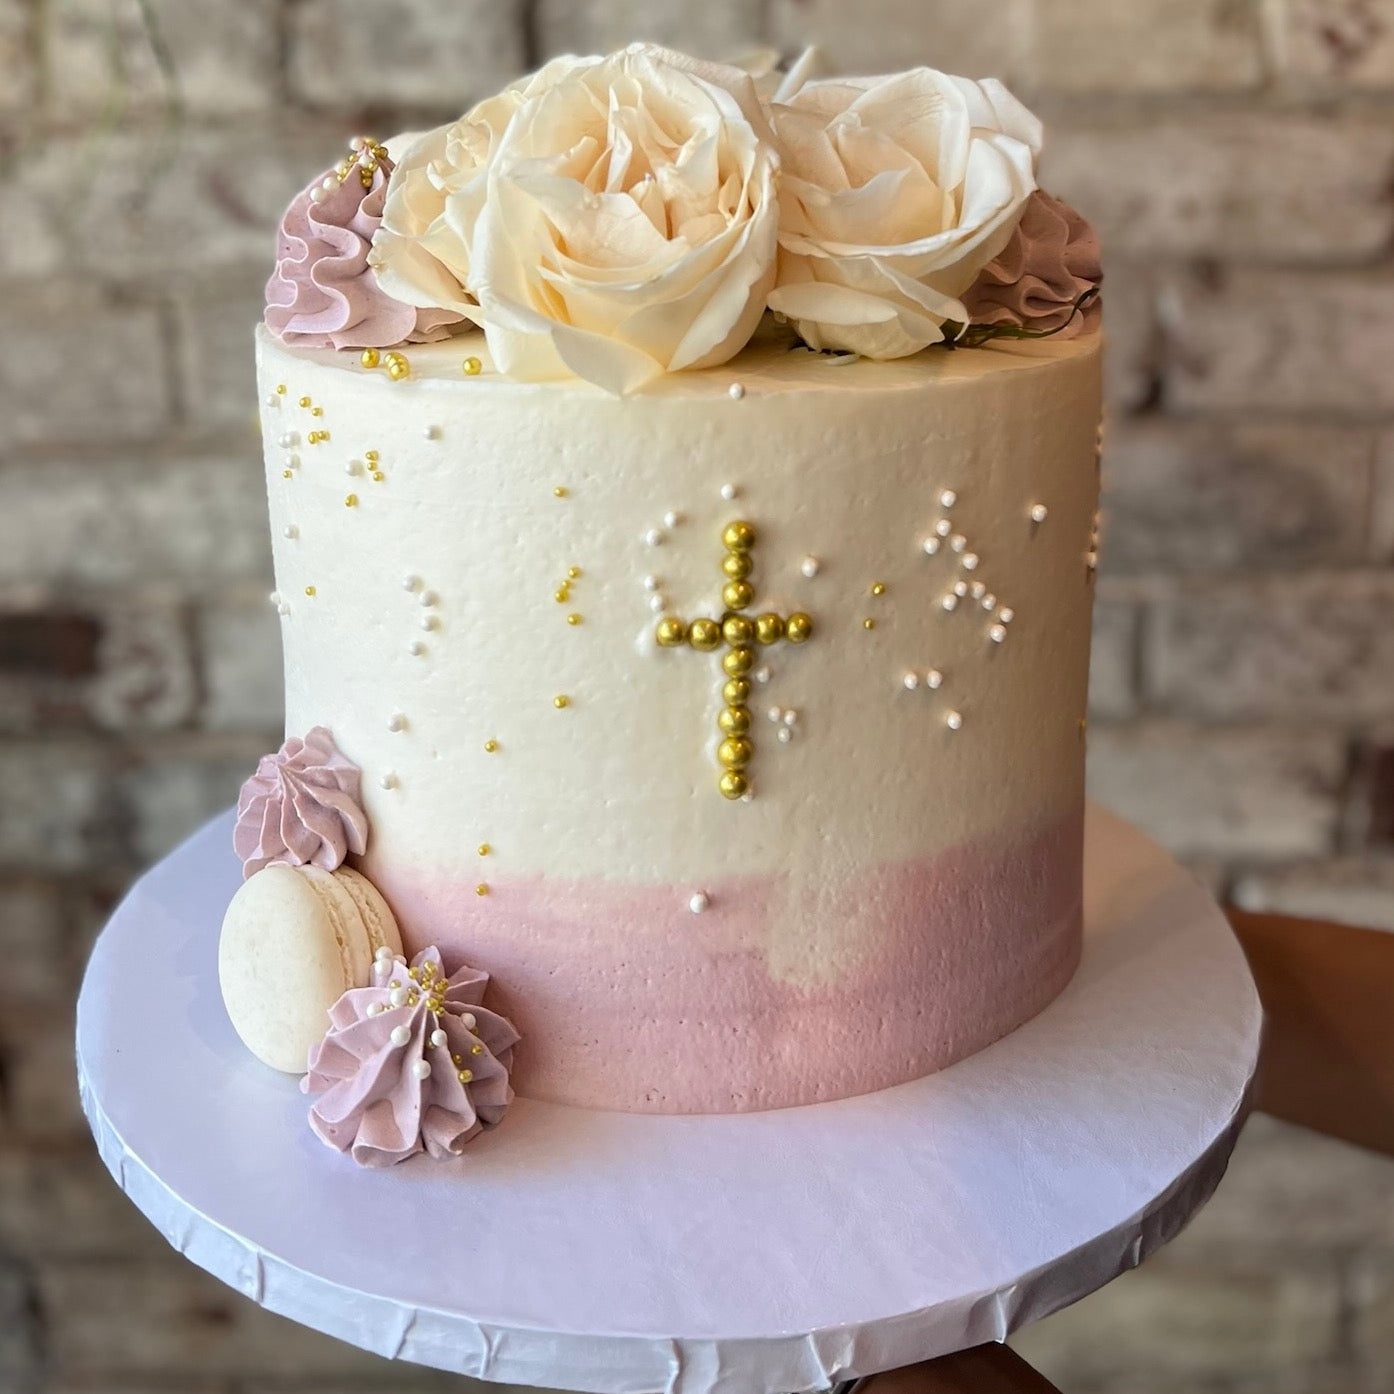 Communion cake with fresh flowers on top